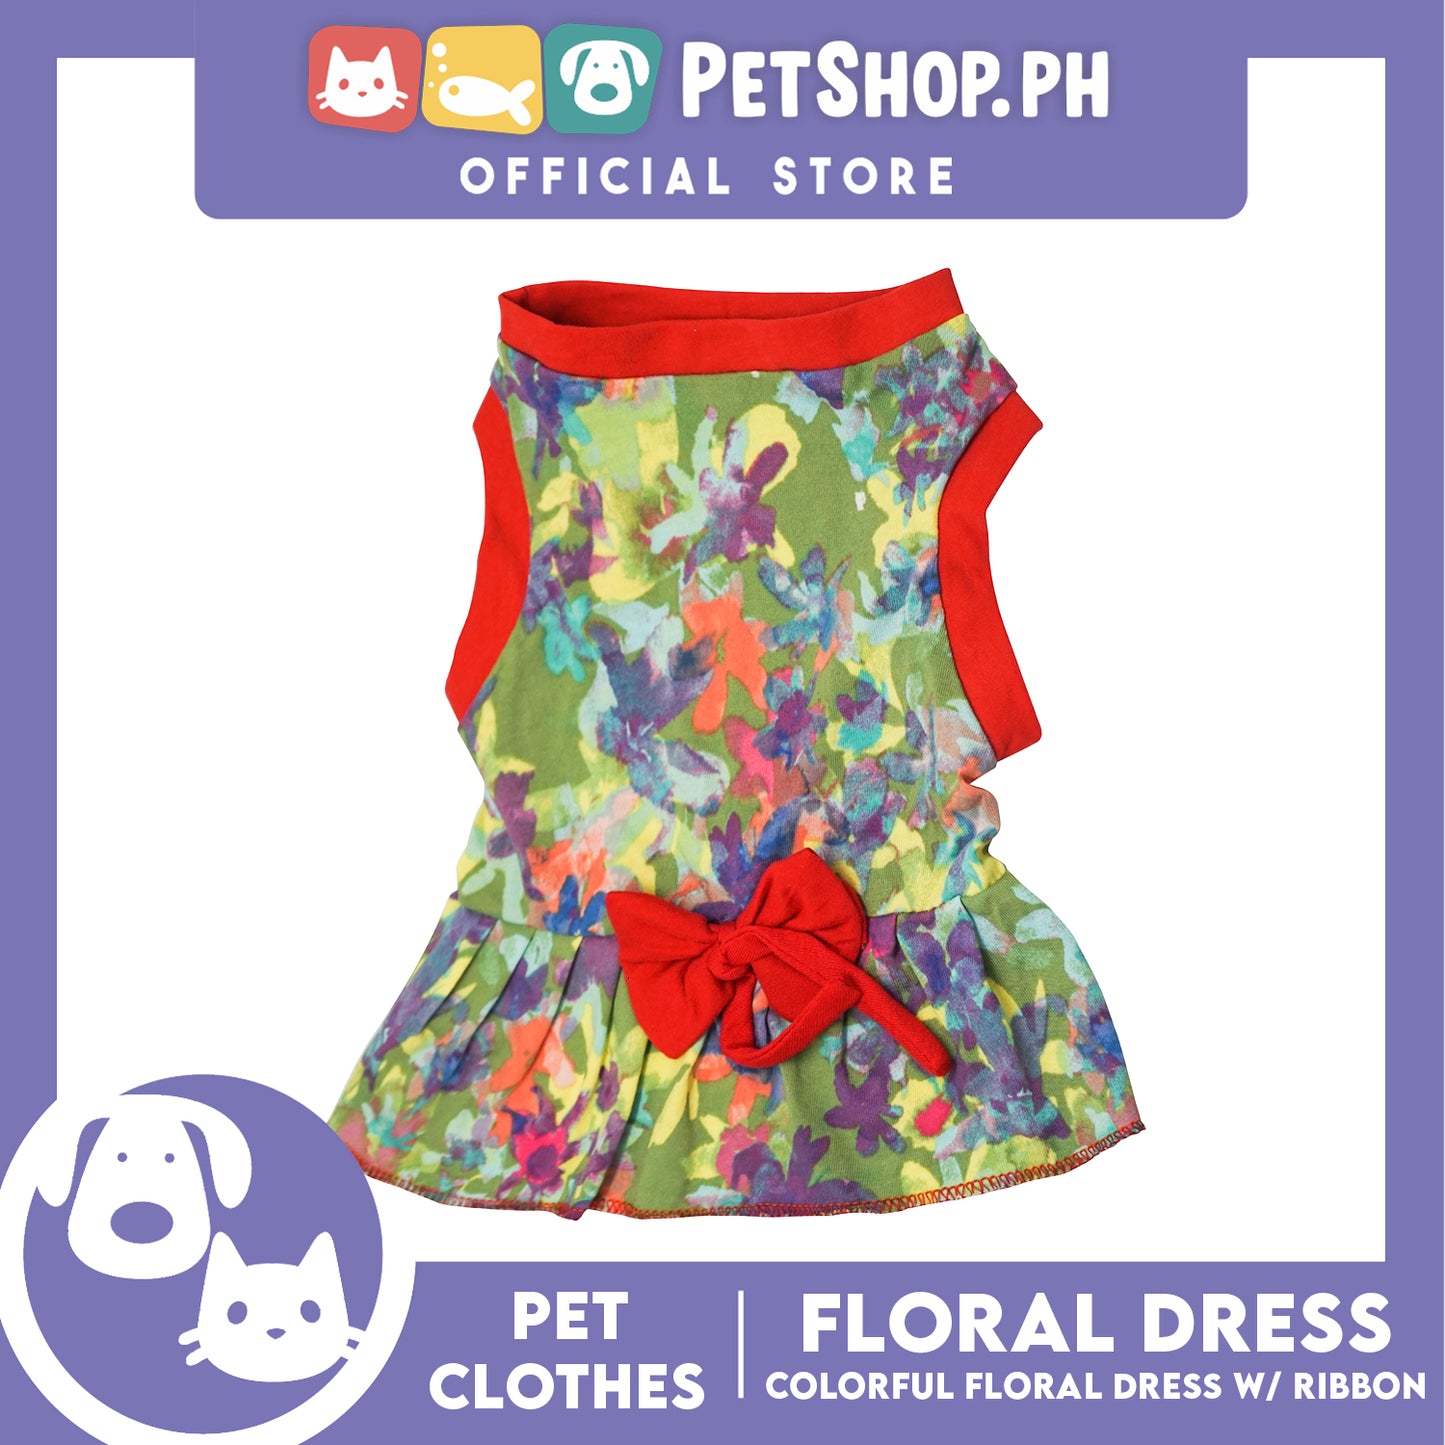 Colorful Floral Pet Dress with Red Ribbon (Extra Large) Pet Shirt for Puppy, Small Dogs and Cats